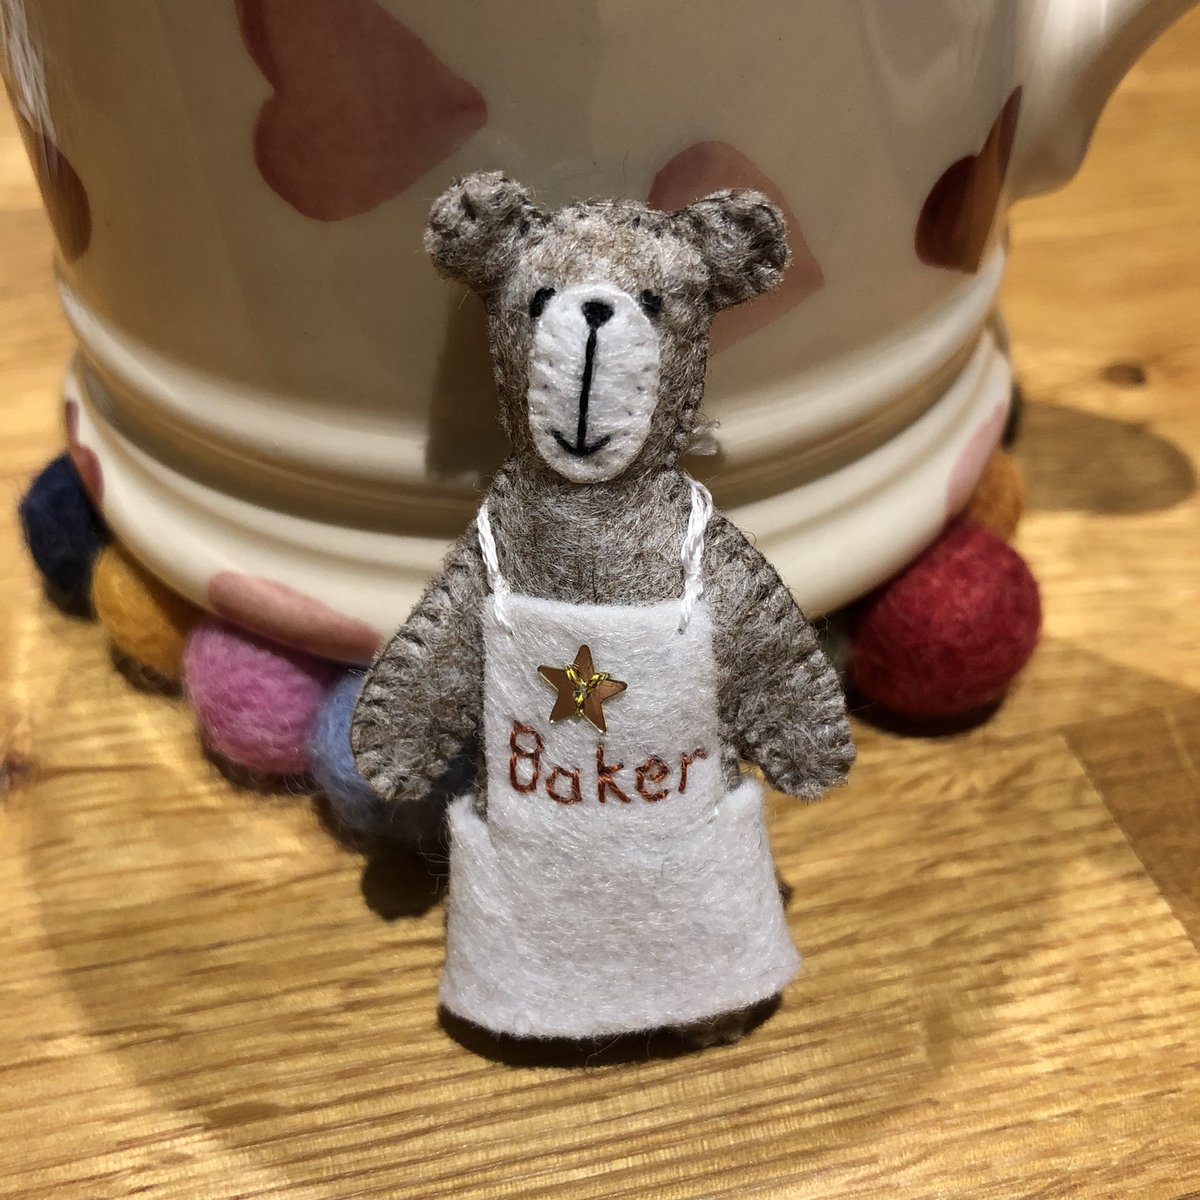 This little #starbaker cannot decide what to make first. Should he practice biscuits ready for next weeks #GBBO bread or go straight for the crumble. 

#pocketbears #handsewn #etsyhandmade #etsyseller #baker #bake #bakeoff #minibears #Collectibles 😊💖🐻